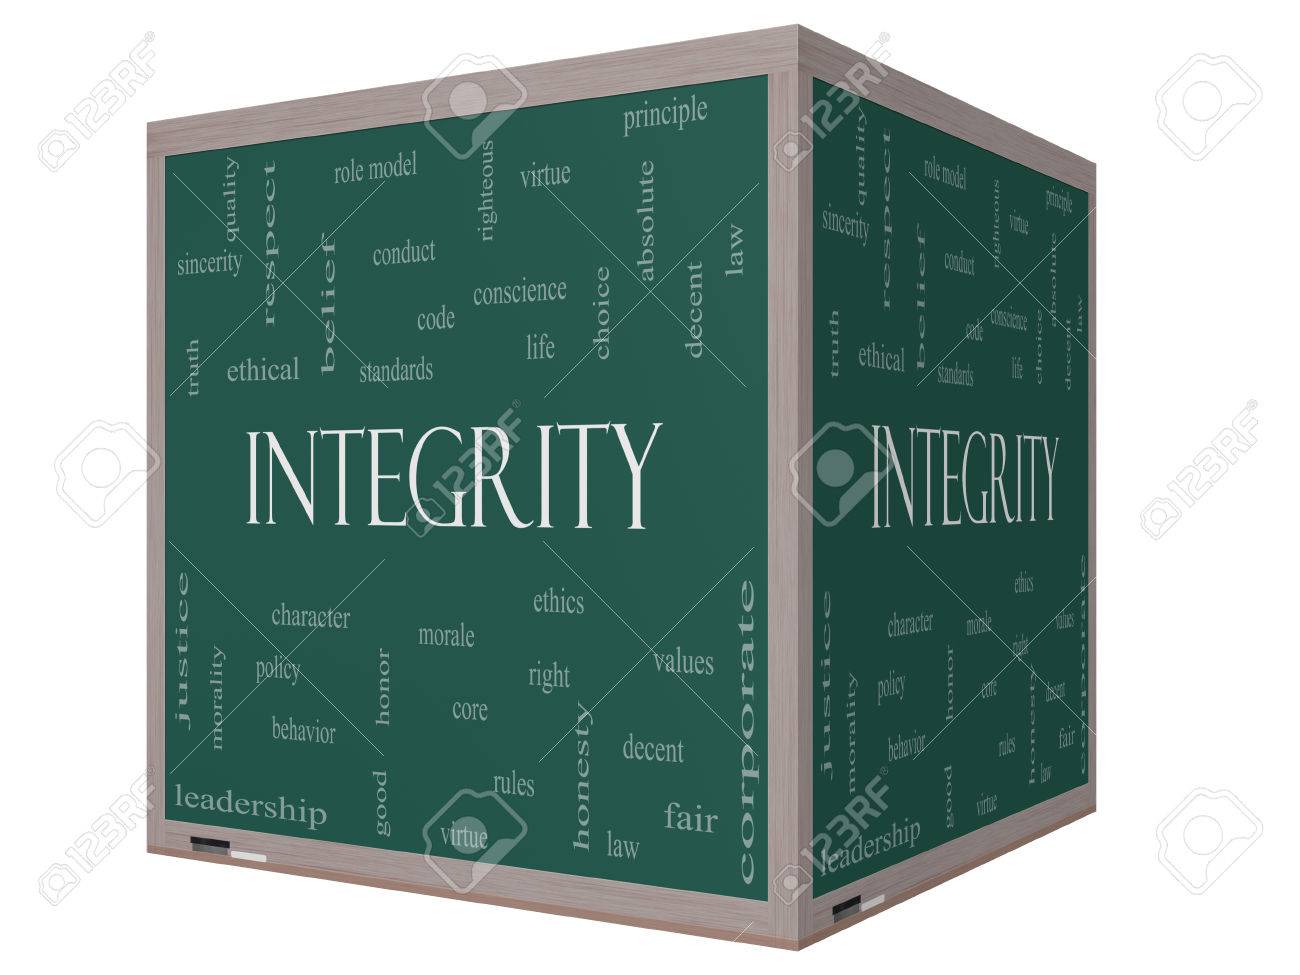 26033294-Integrity-Word-Cloud-Concept-on-a-3D-cube-Blackboard-with-great-terms-such-as-virtue-code-conduct-an-Stock-Photo.jpg